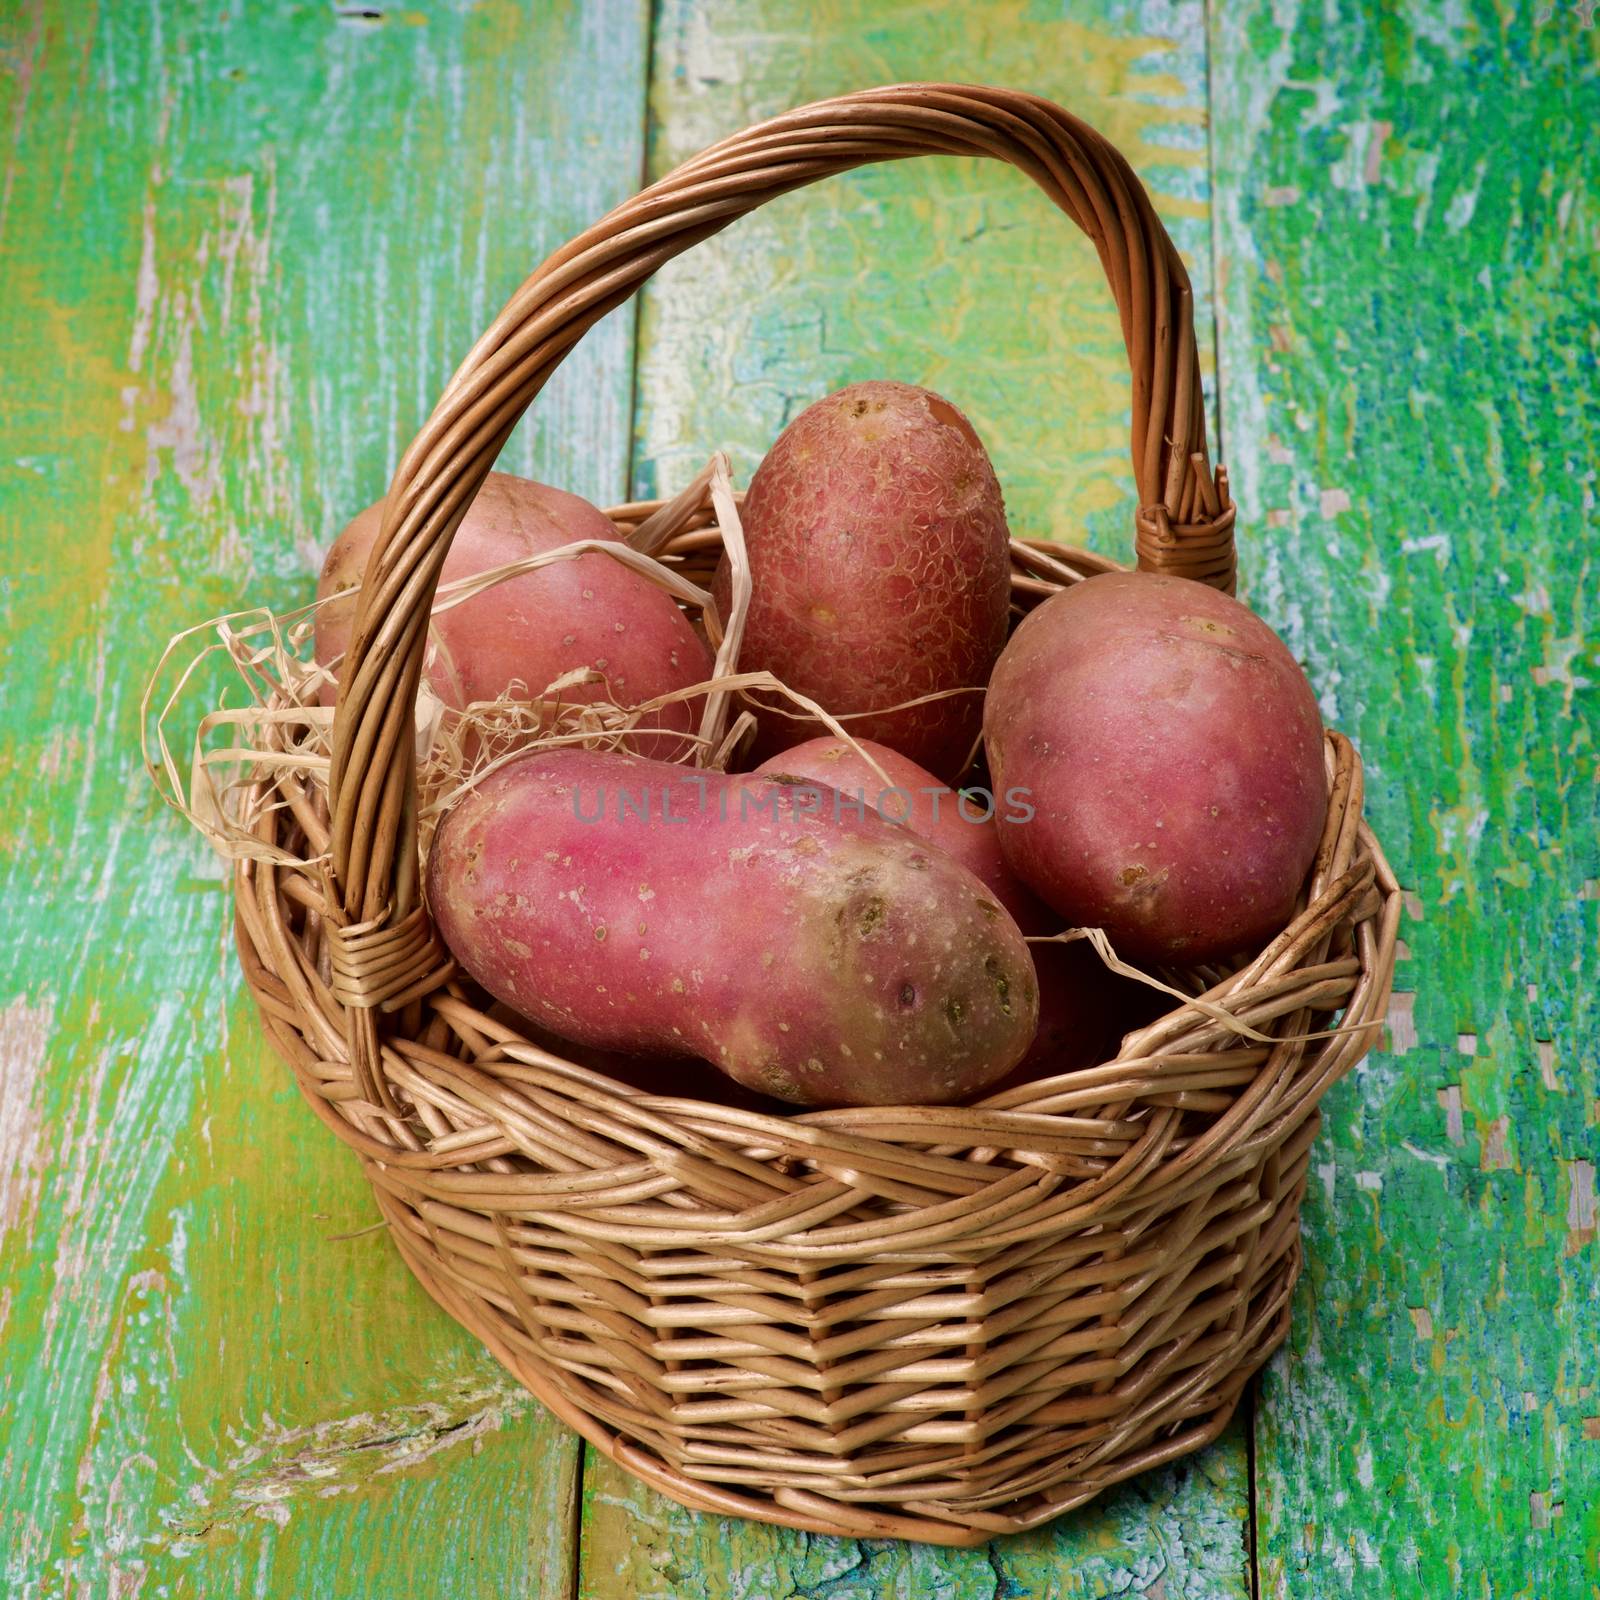 Arrangement of Fresh Raw Red Potatoes in Wicker Basket closeup on Cracked Wooden background